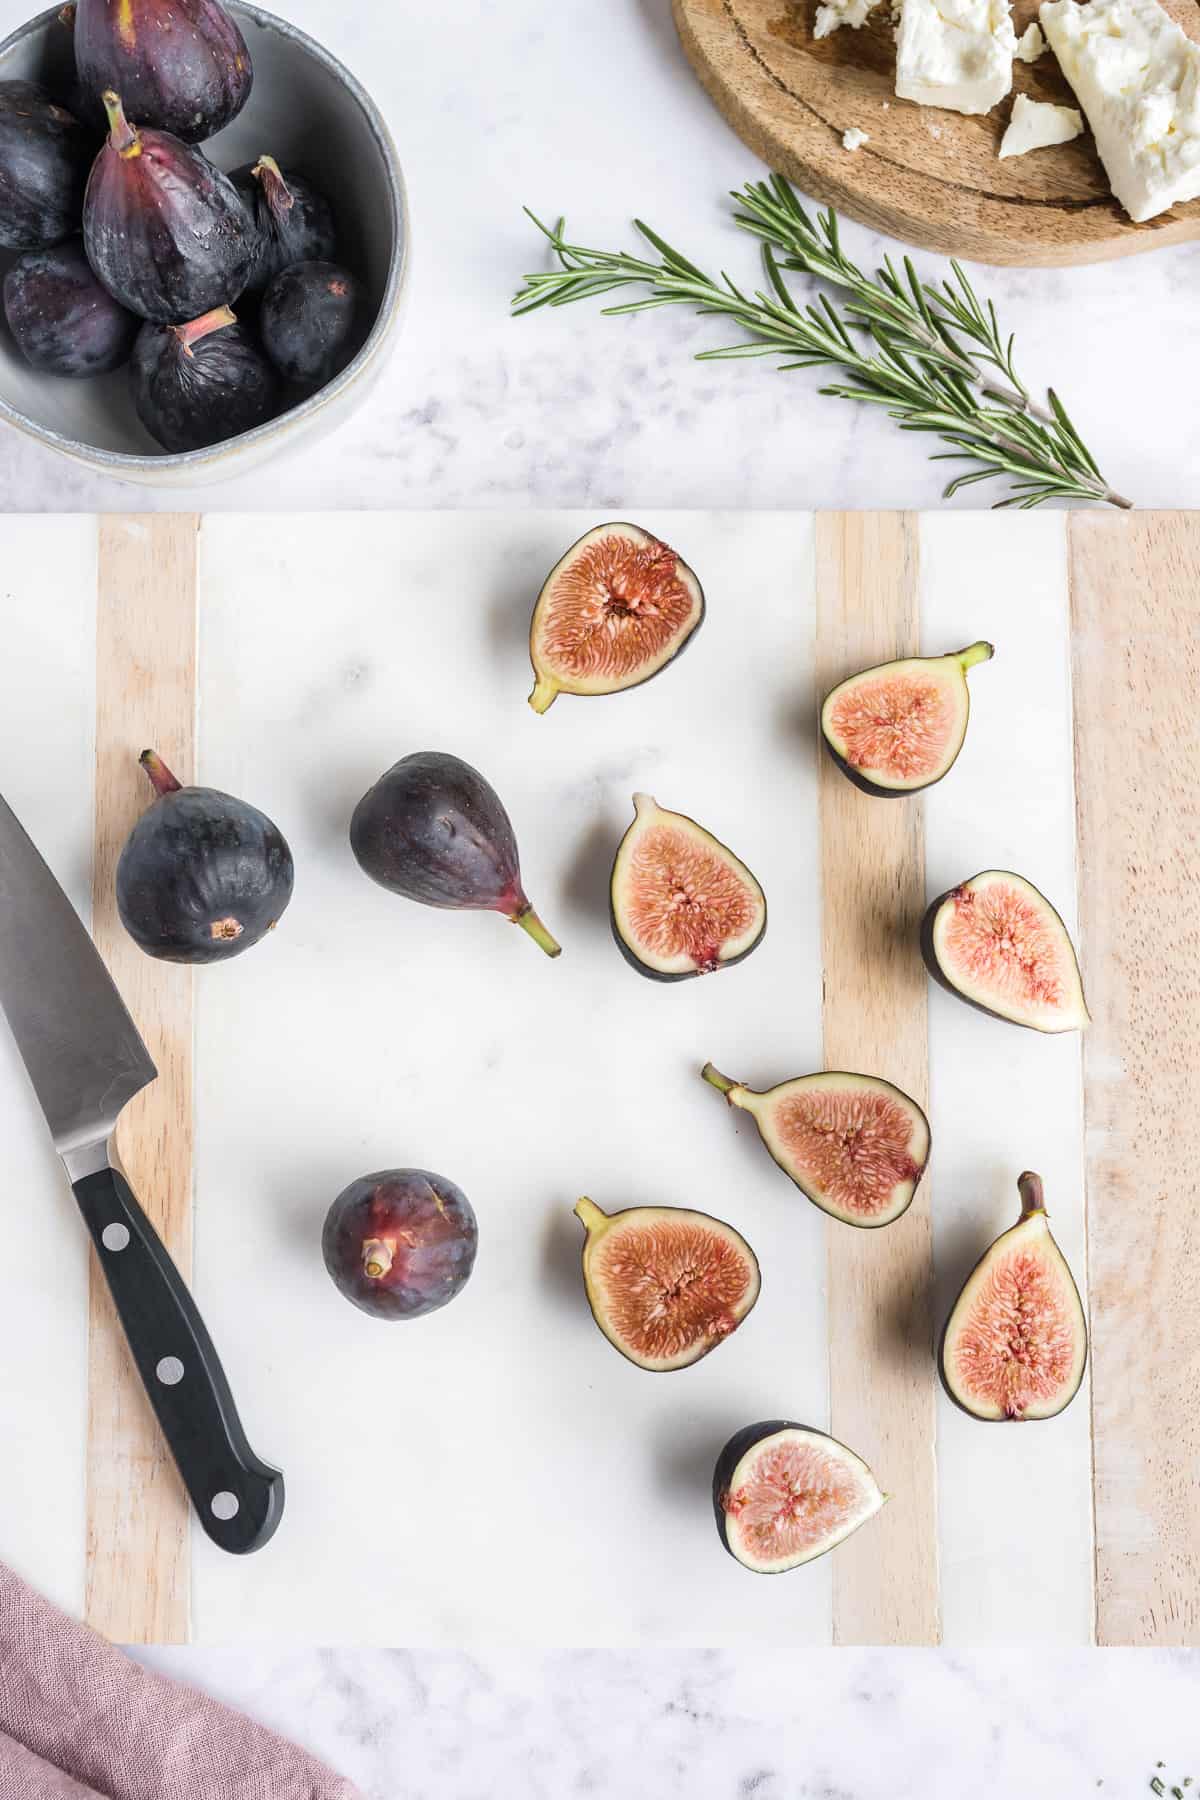 Whole and halved figs on a cutting board with a knife with a bowl of figs and rosemary in the background.